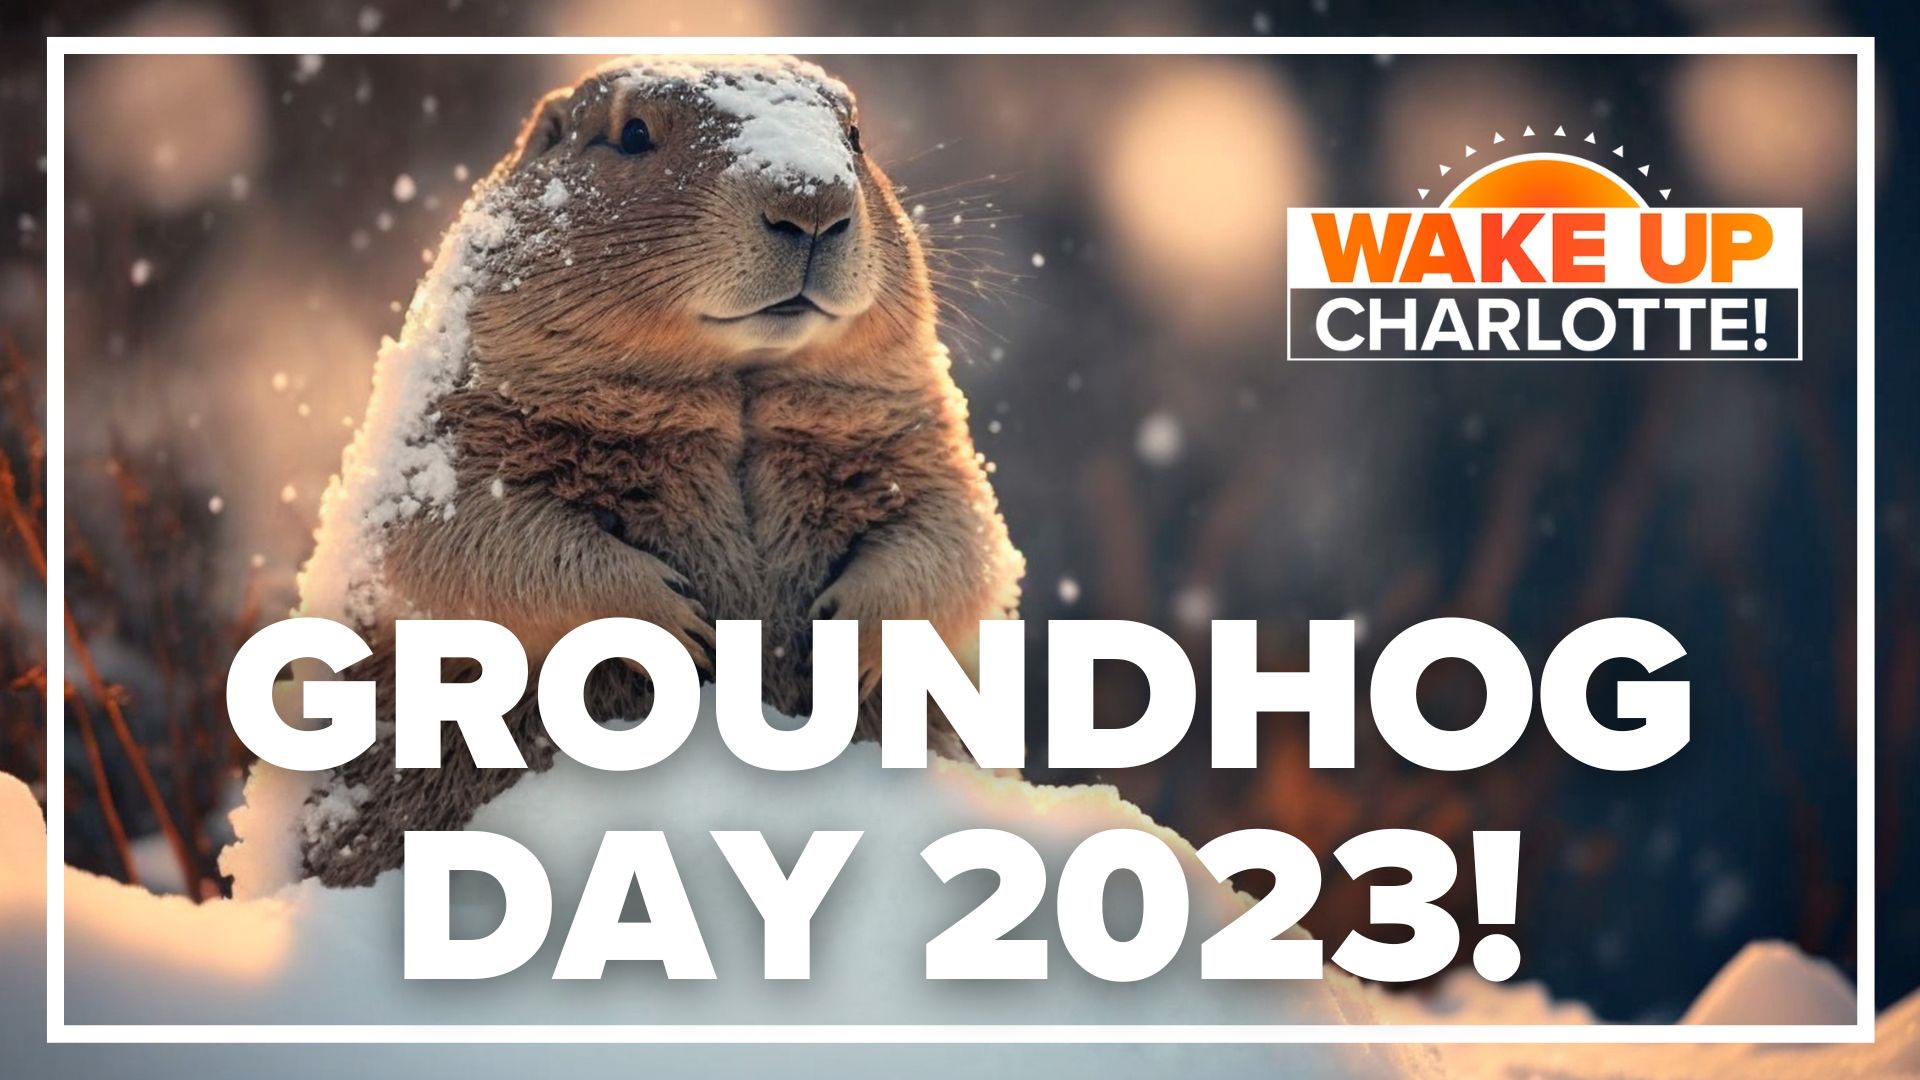 Happy Groundhog Day! We're in for six more weeks of winter ... or so Punxutawney Phil says. Are you ready for spring?